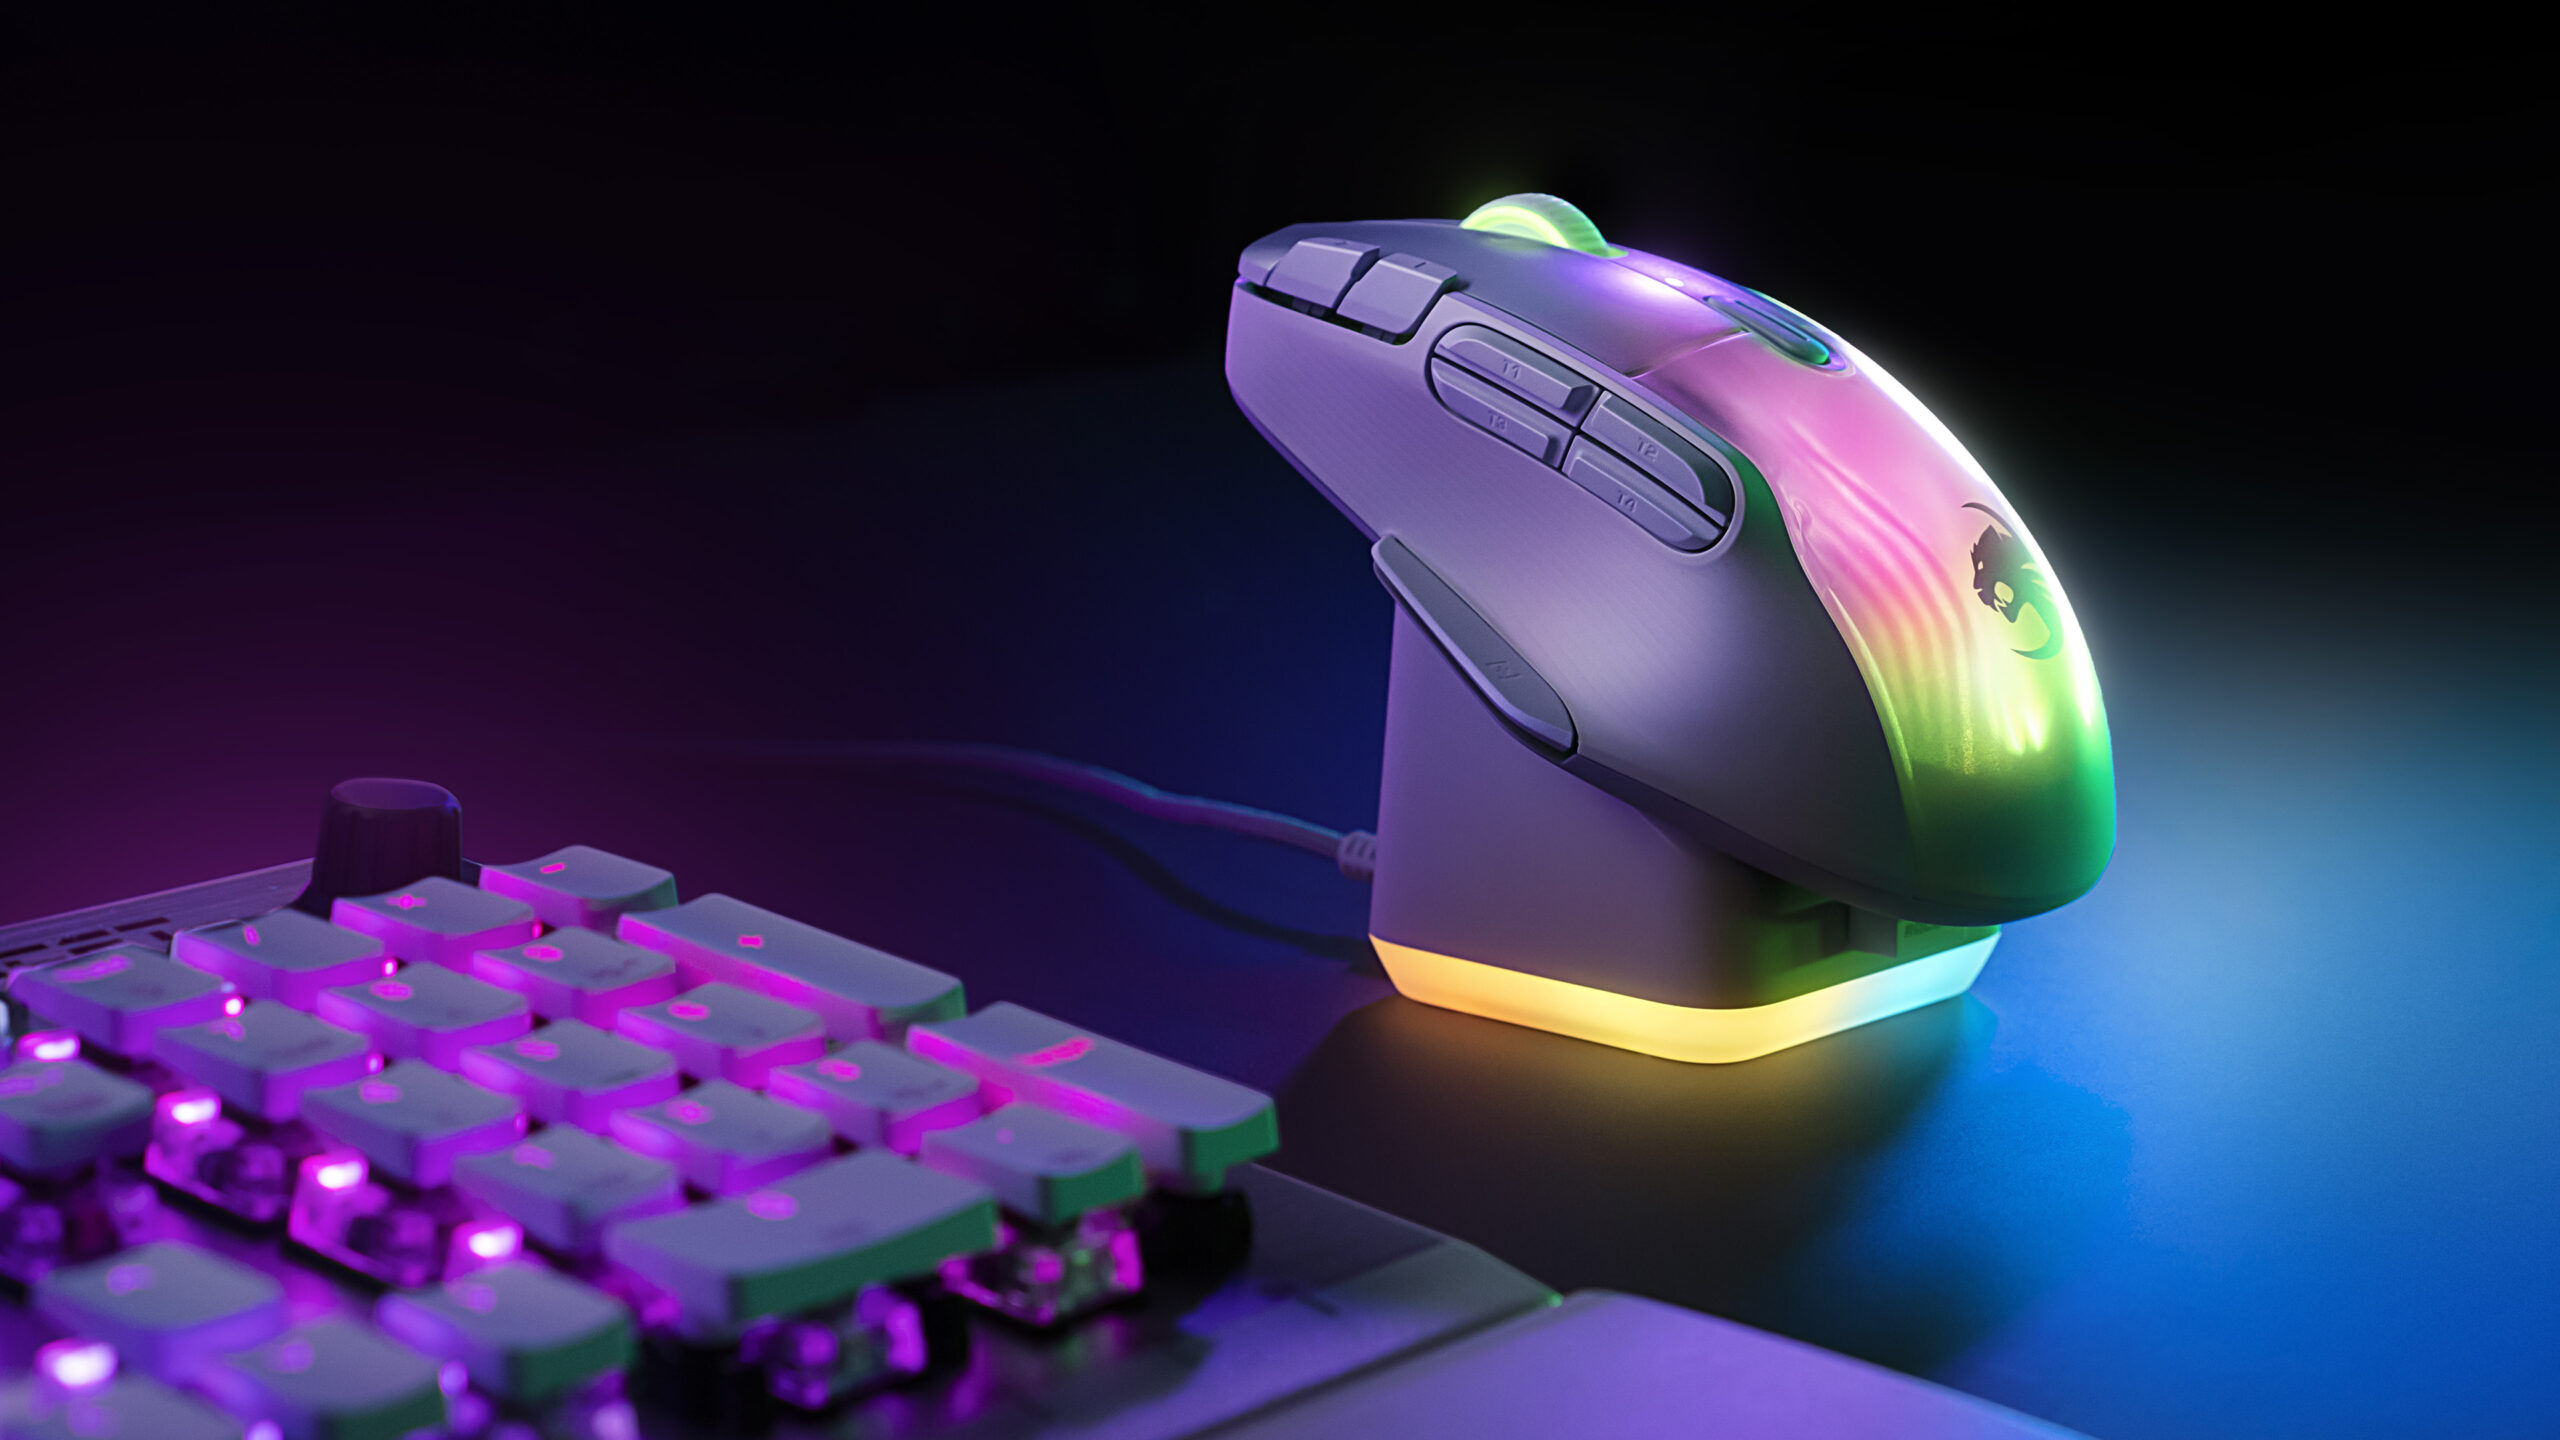 ROCCAT’s Iconic Kone XP Mouse Meets Stellar Wireless Tech in the All-New Kone XP Air Wireless Customizable RGB Gaming Mouse